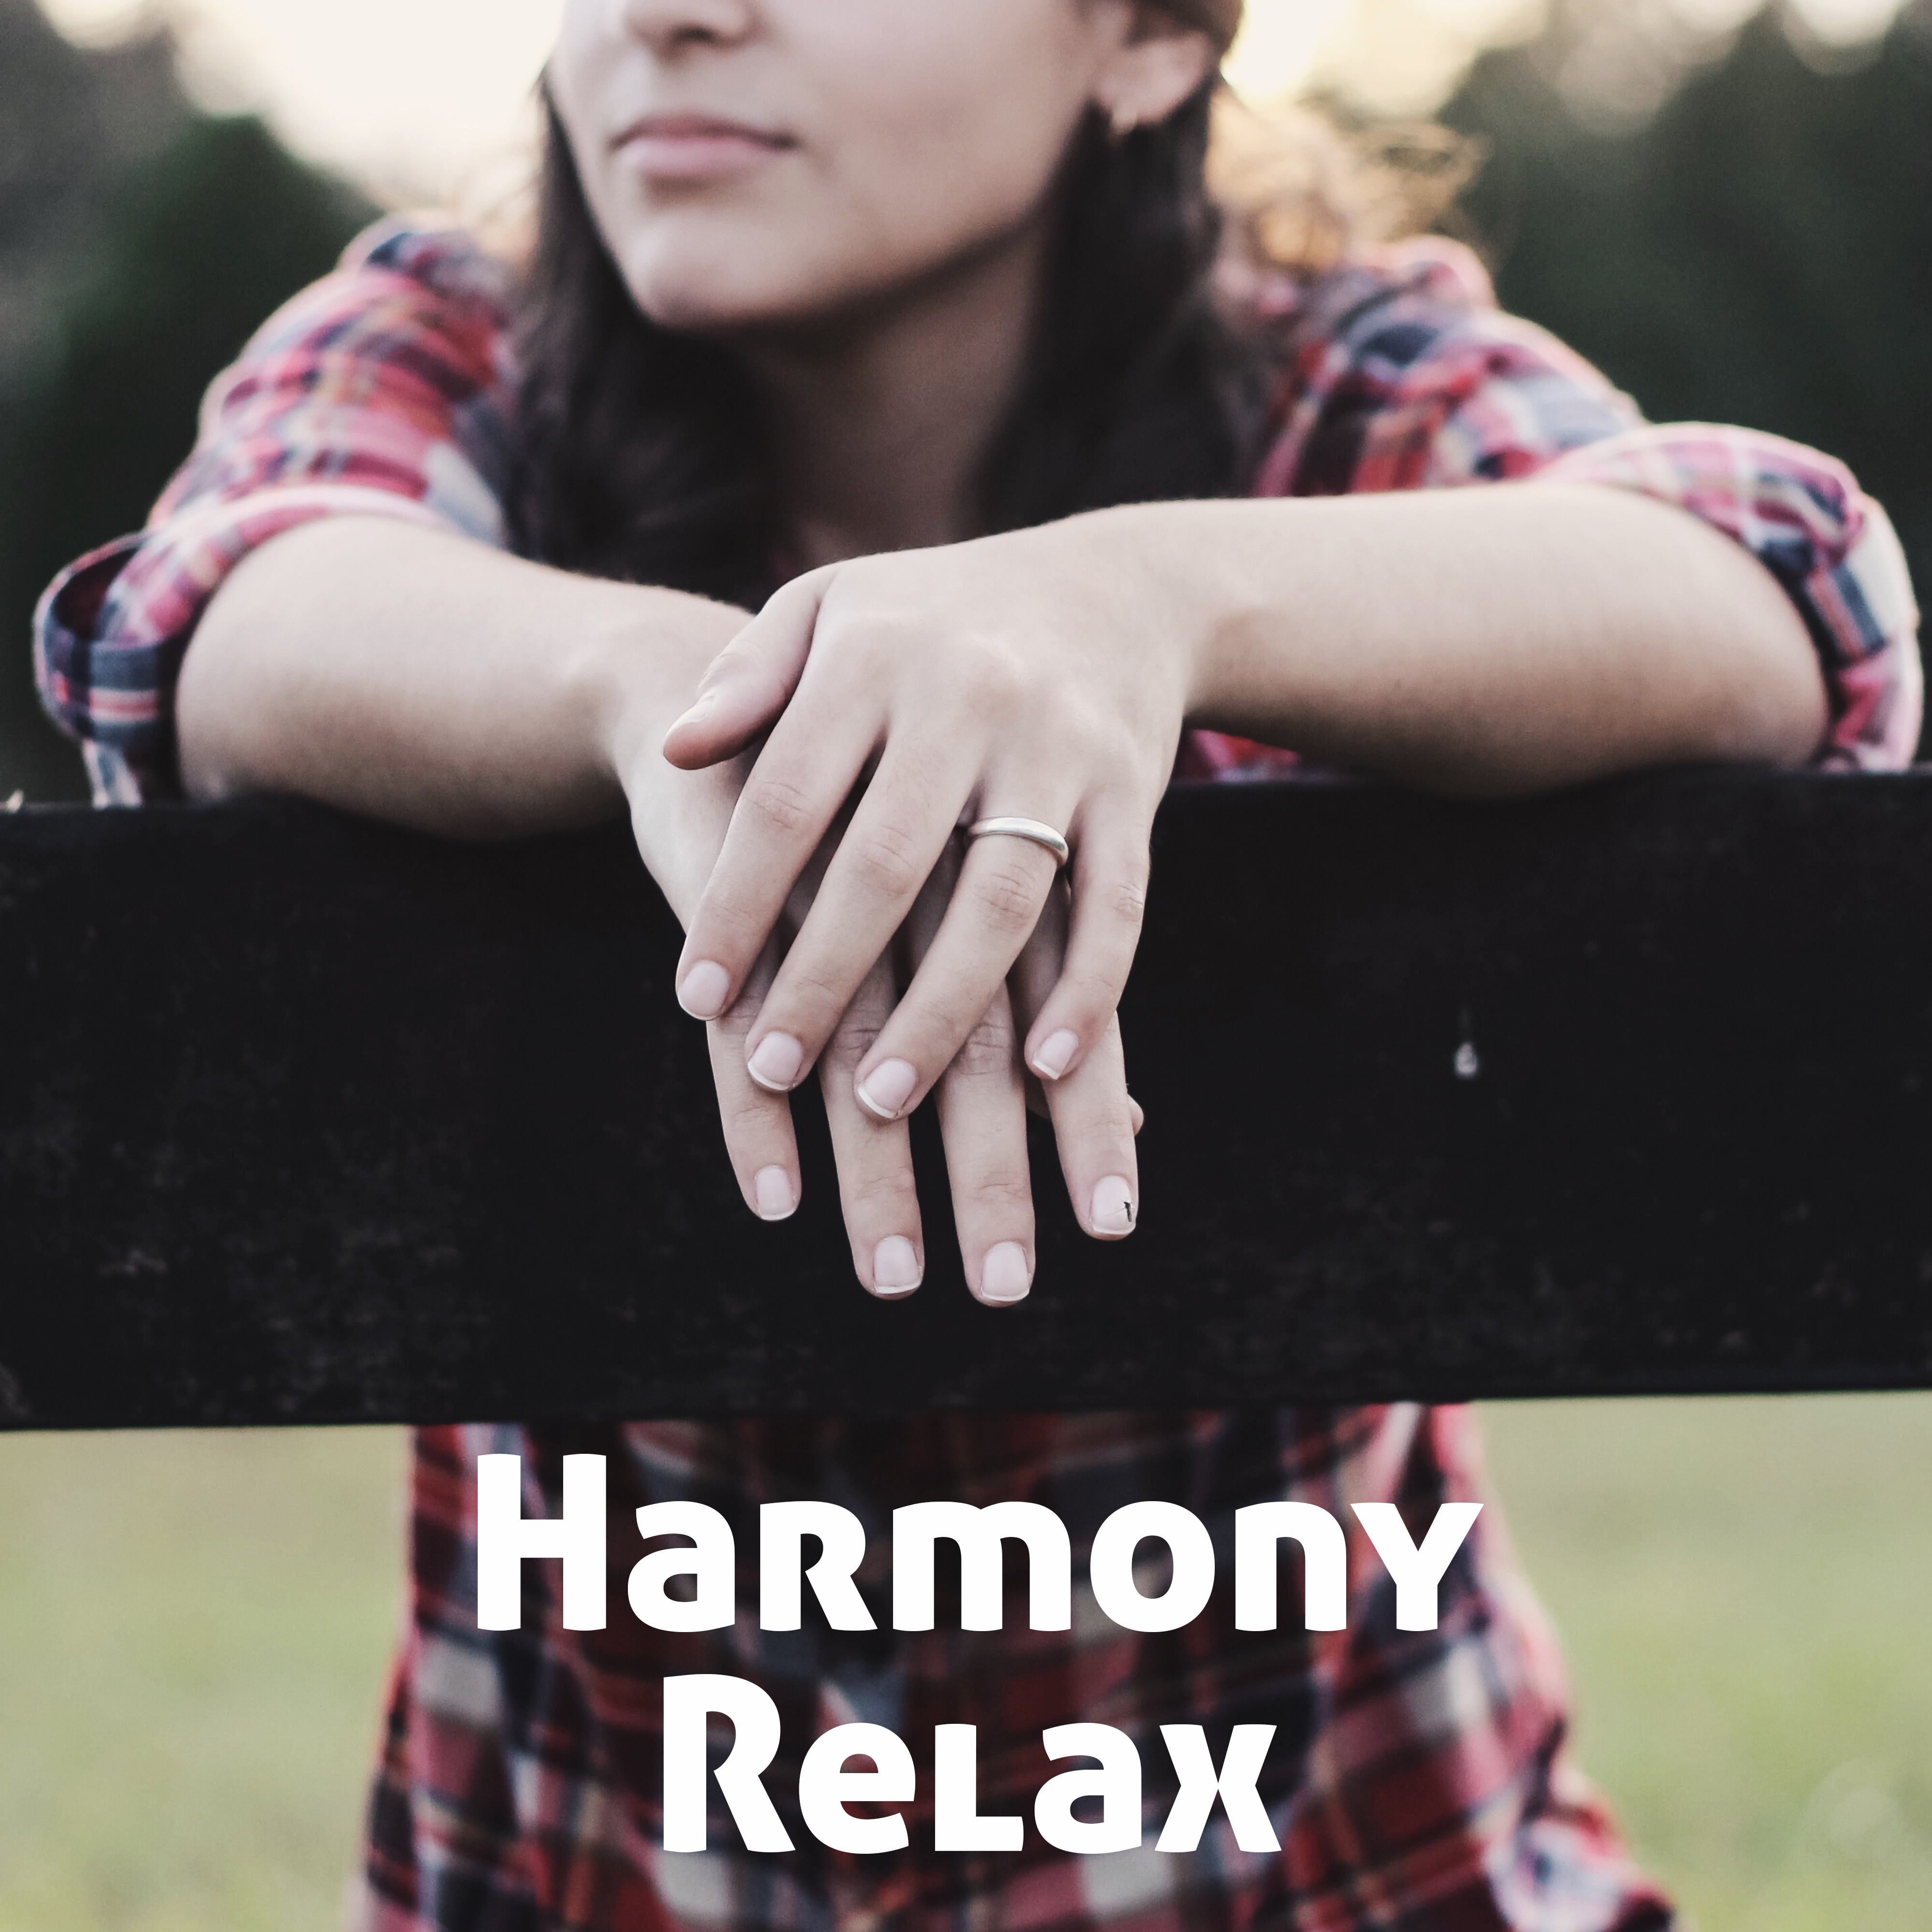 Harmony Relax  Relaxing Music, Peaceful Nature Sounds, Instrumental New Age Music for Total Rest